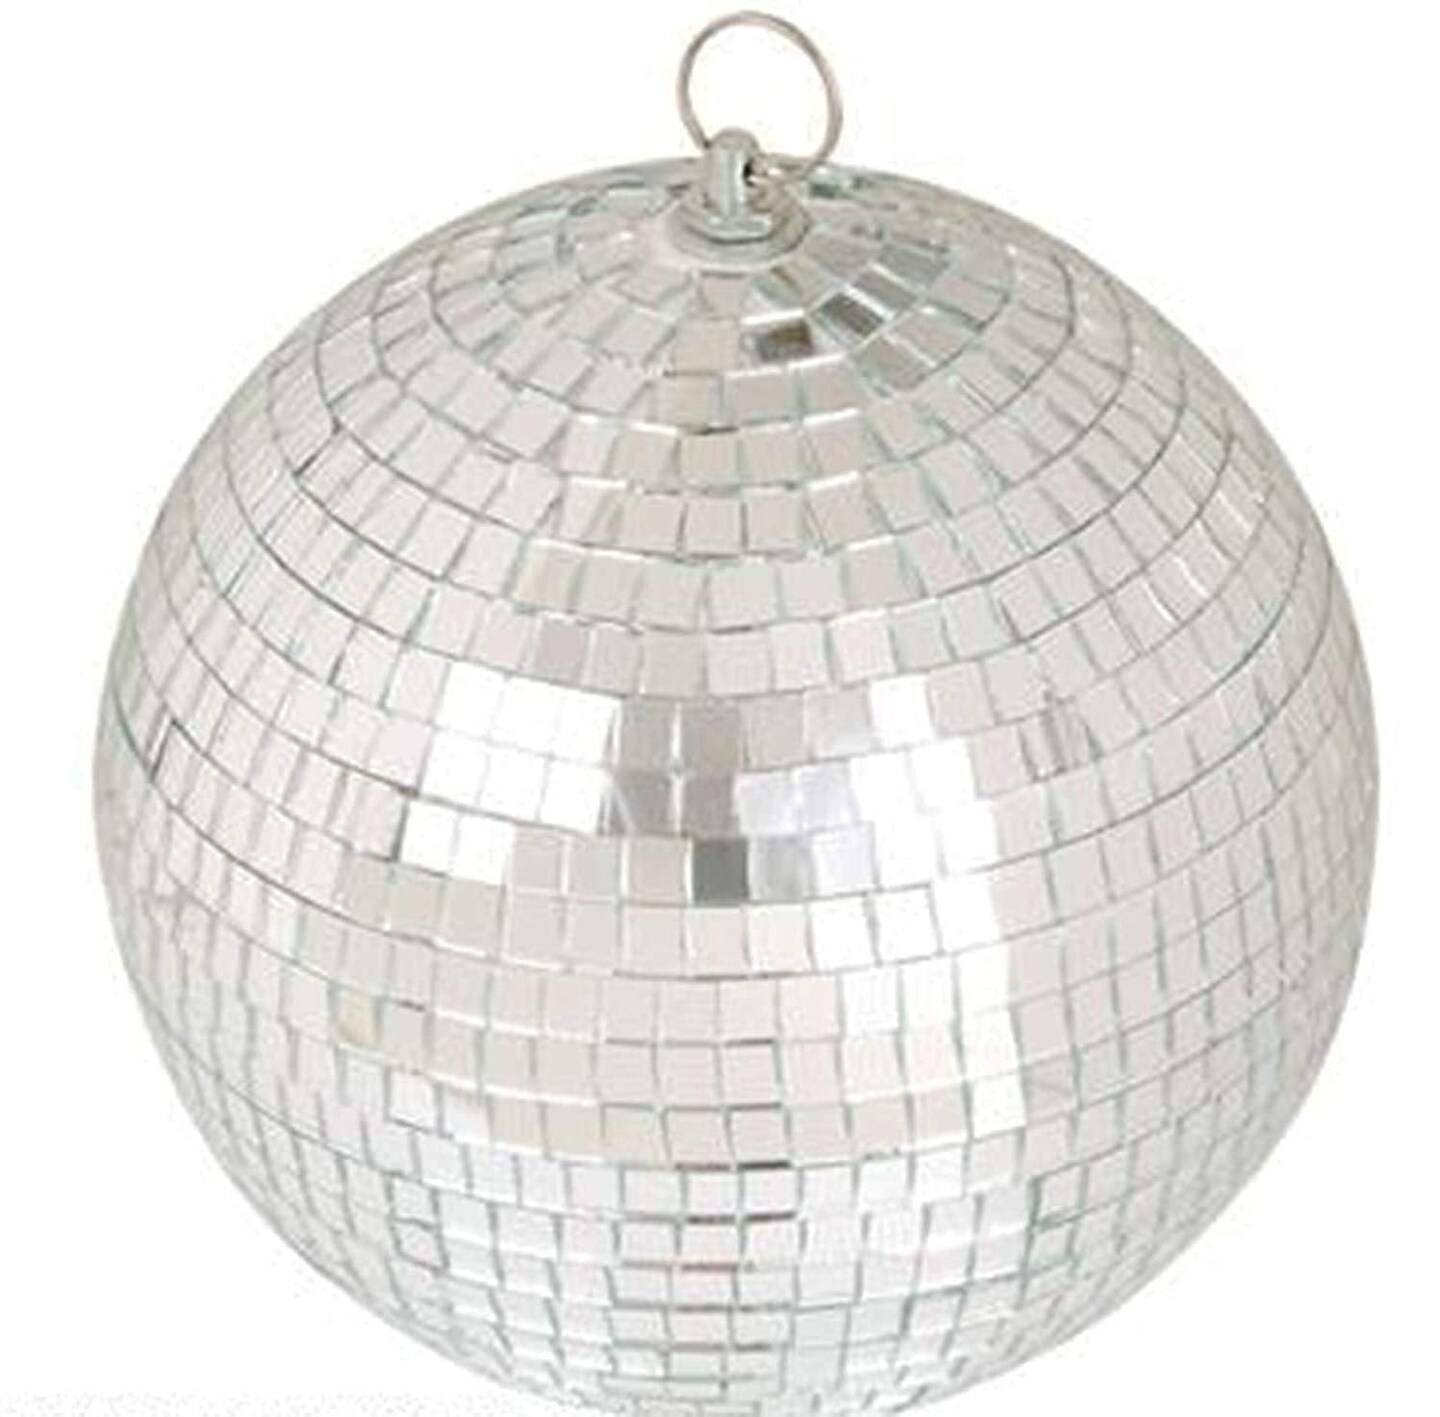 Big Mo&#x27;s Toys Mirror Ball - Silver Hanging Disco Ball Party Decoration Accessories for 70s Parties